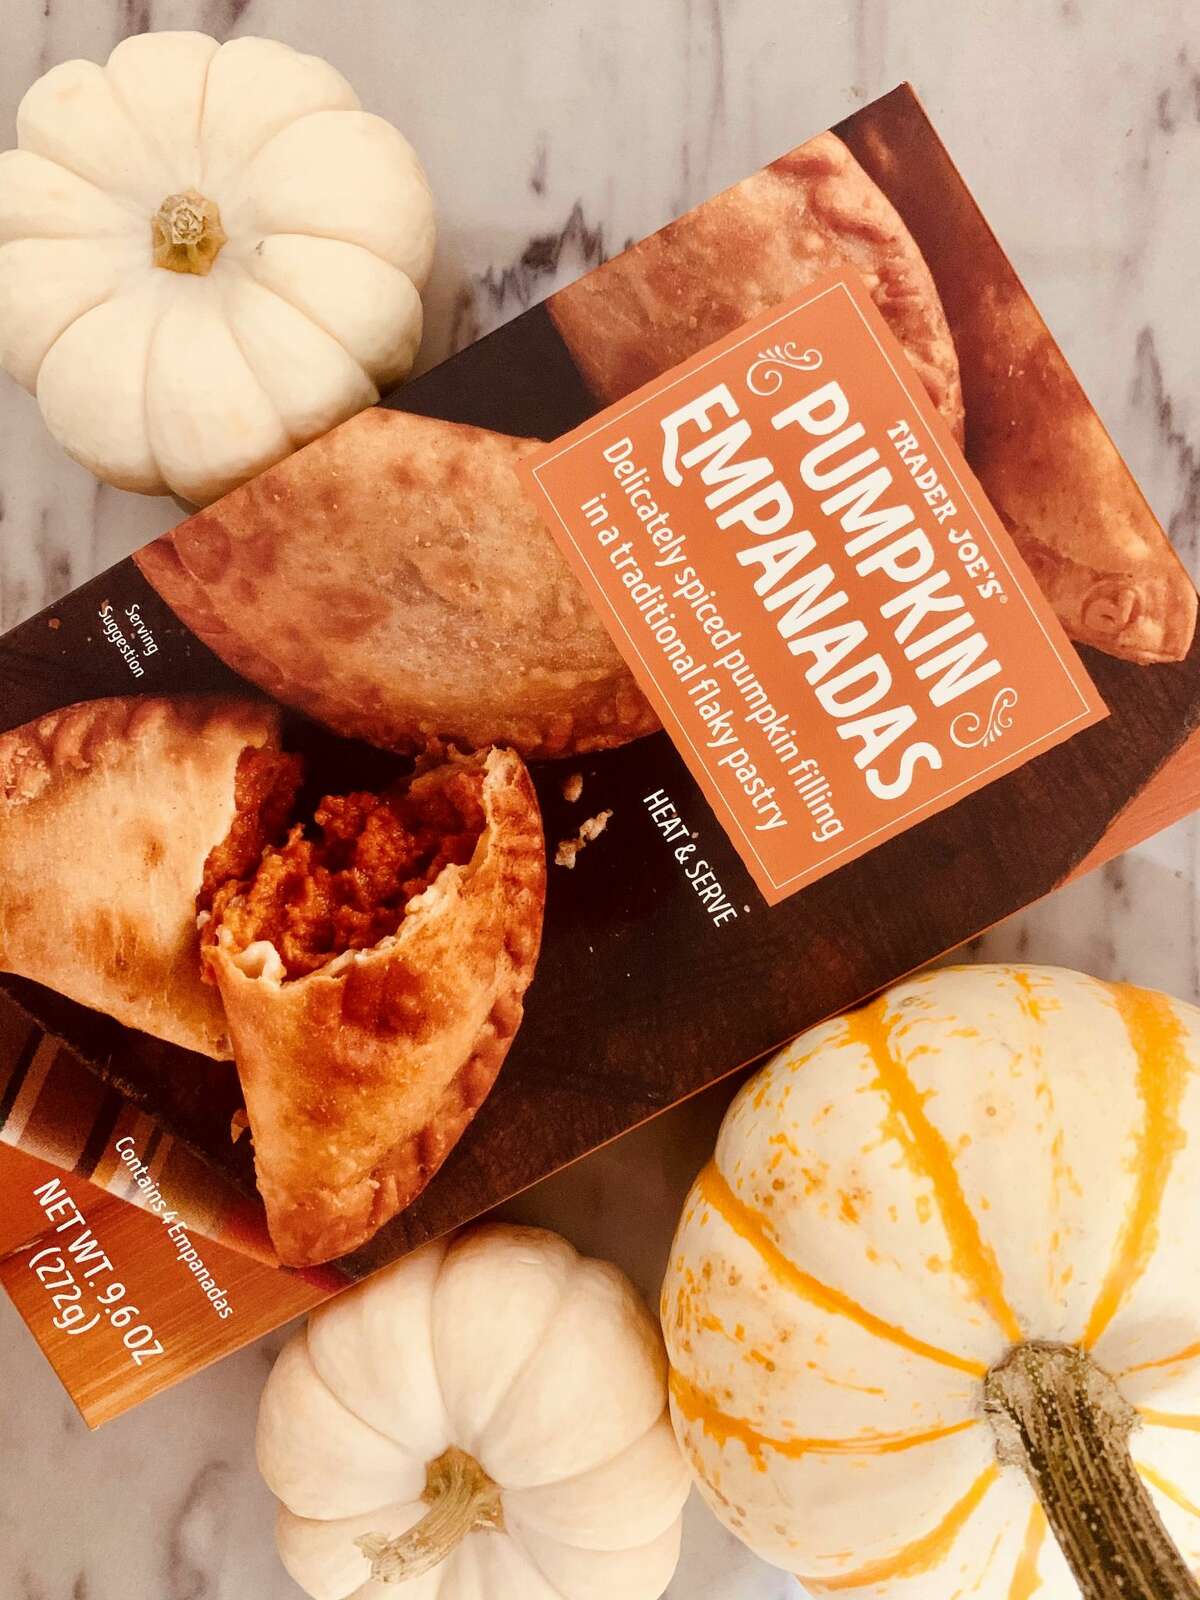 We had high hopes for this Trader Joe's pumpkin newbie, as did many others highly anticipating the release of these pumpkin-stuffed pockets given we've rarely uncovered a pumpkin empanada. Now, we understand why. While an interesting take on pumpkin, maybe curiosity got the best of us on this one. After baking, the soggy breaded layer didn't give us that, "Hey, it's autumn!" punch we were looking for, and the sweetened pumpkin inside made these guys seem like a dessert in dinner's clothing. 